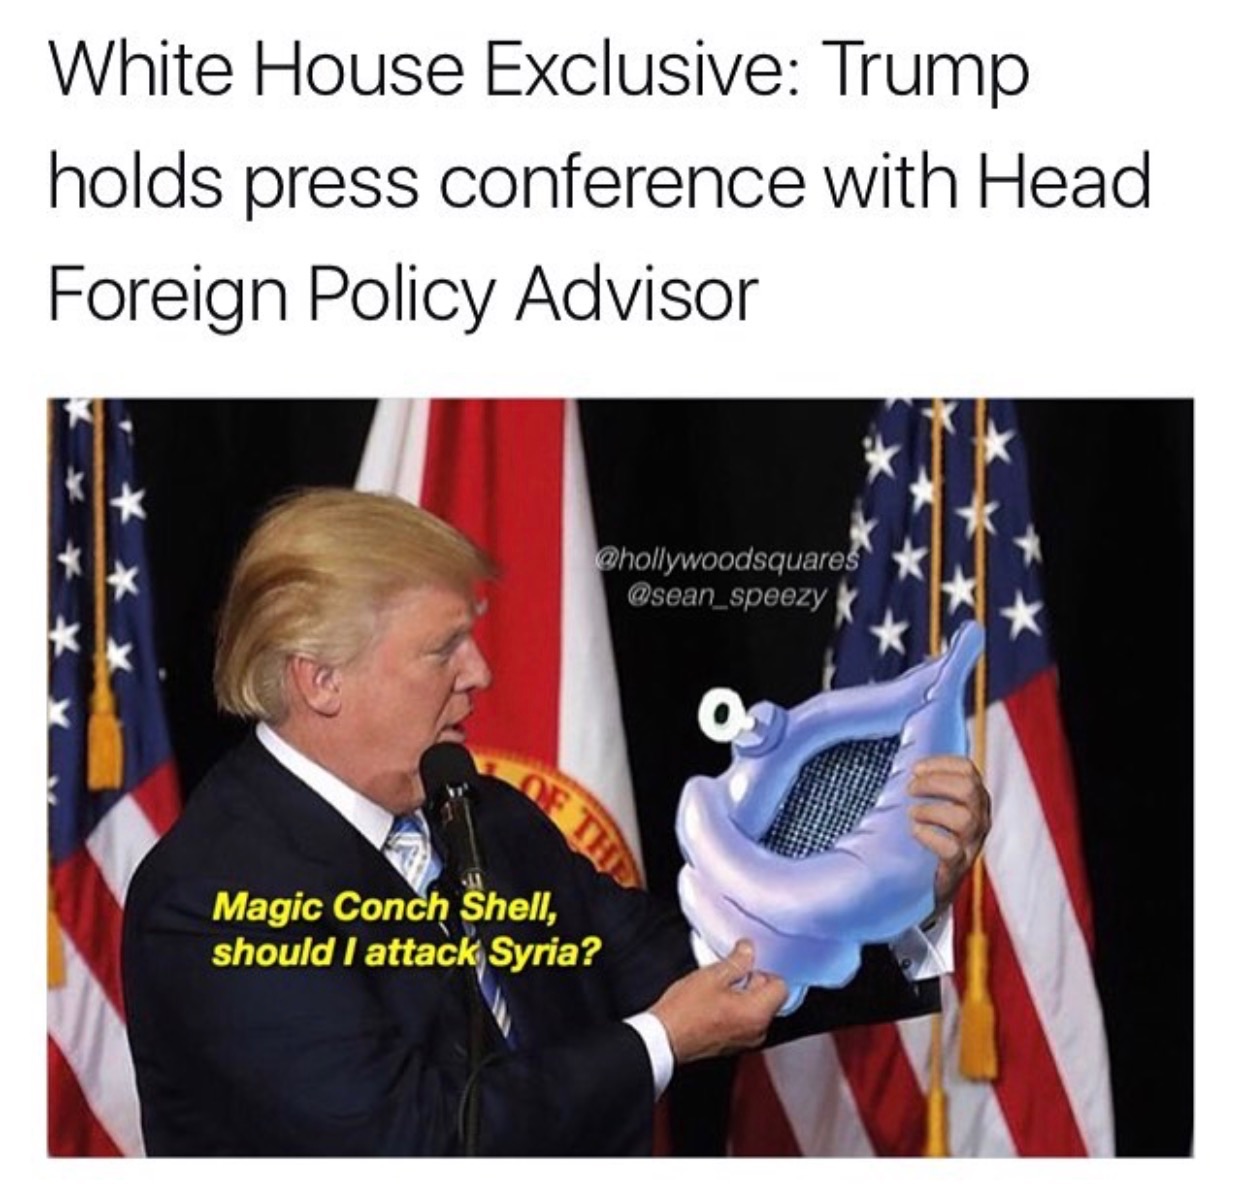 magic conch shell trump - White House Exclusive Trump holds press conference with Head Foreign Policy Advisor Magic Conch Shell, should I attack Syria?